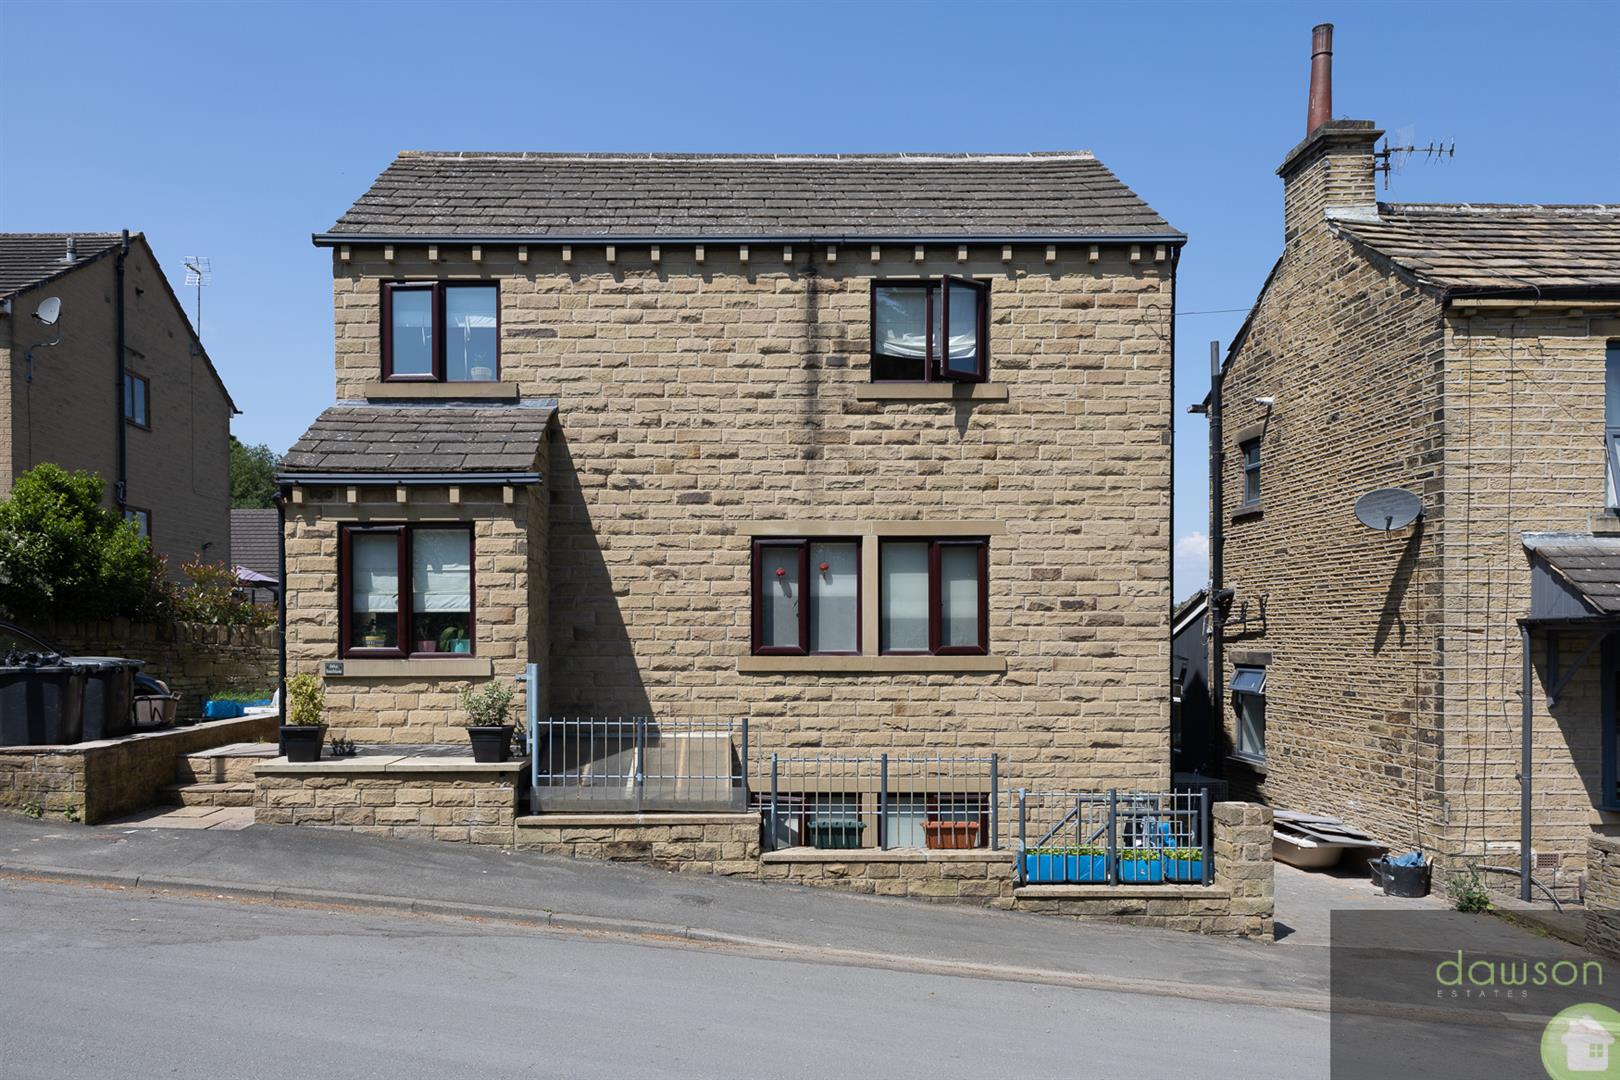 4 bed detached house for sale in South Lane, Elland, HX5 